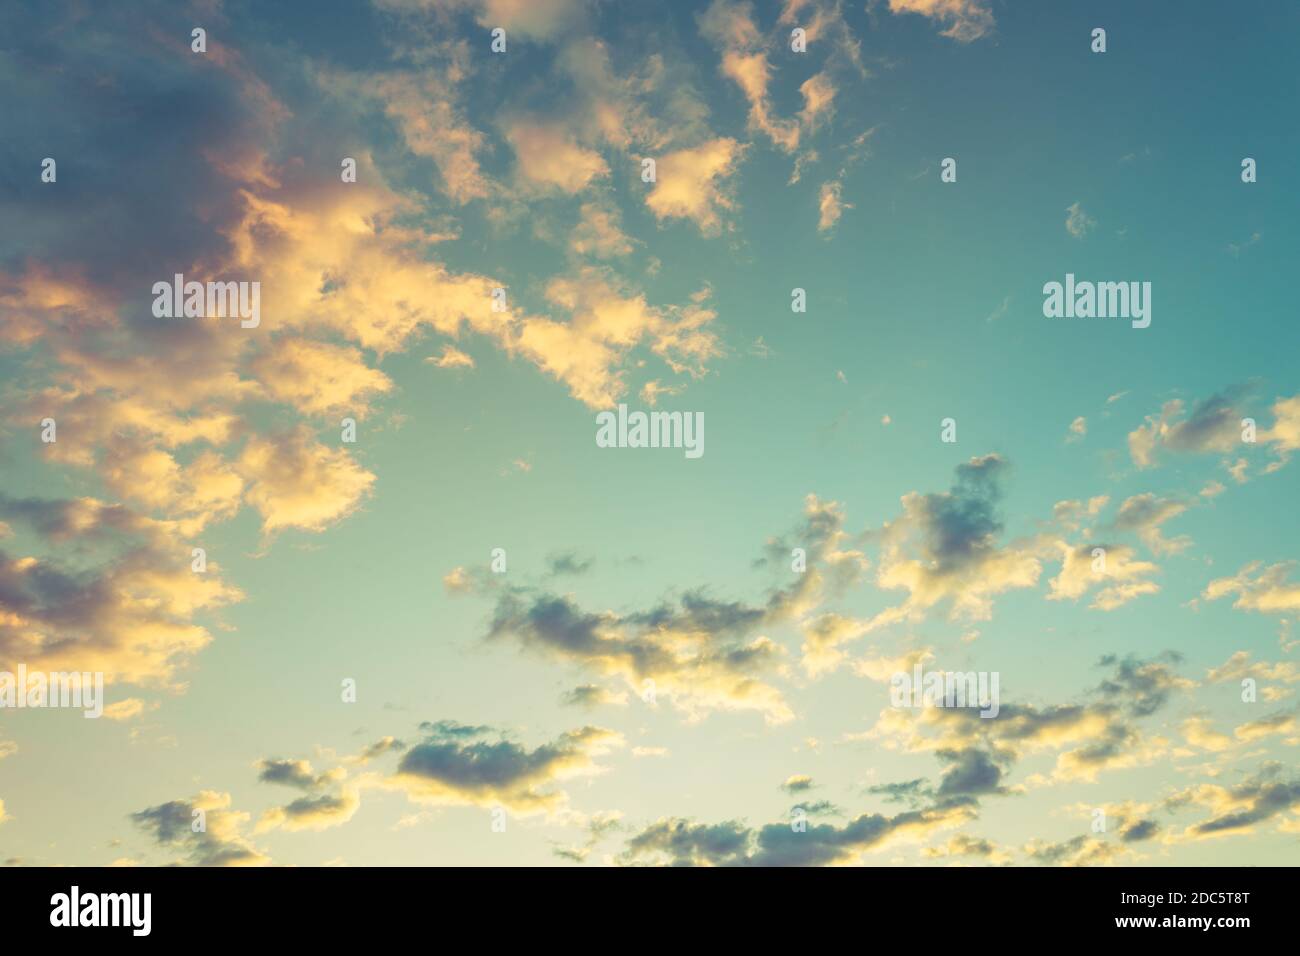 Sky with clouds and sun. Romantic skyscape, summer sky clouds, sunset colors. Dream weather, positive vibes, meditation Stock Photo